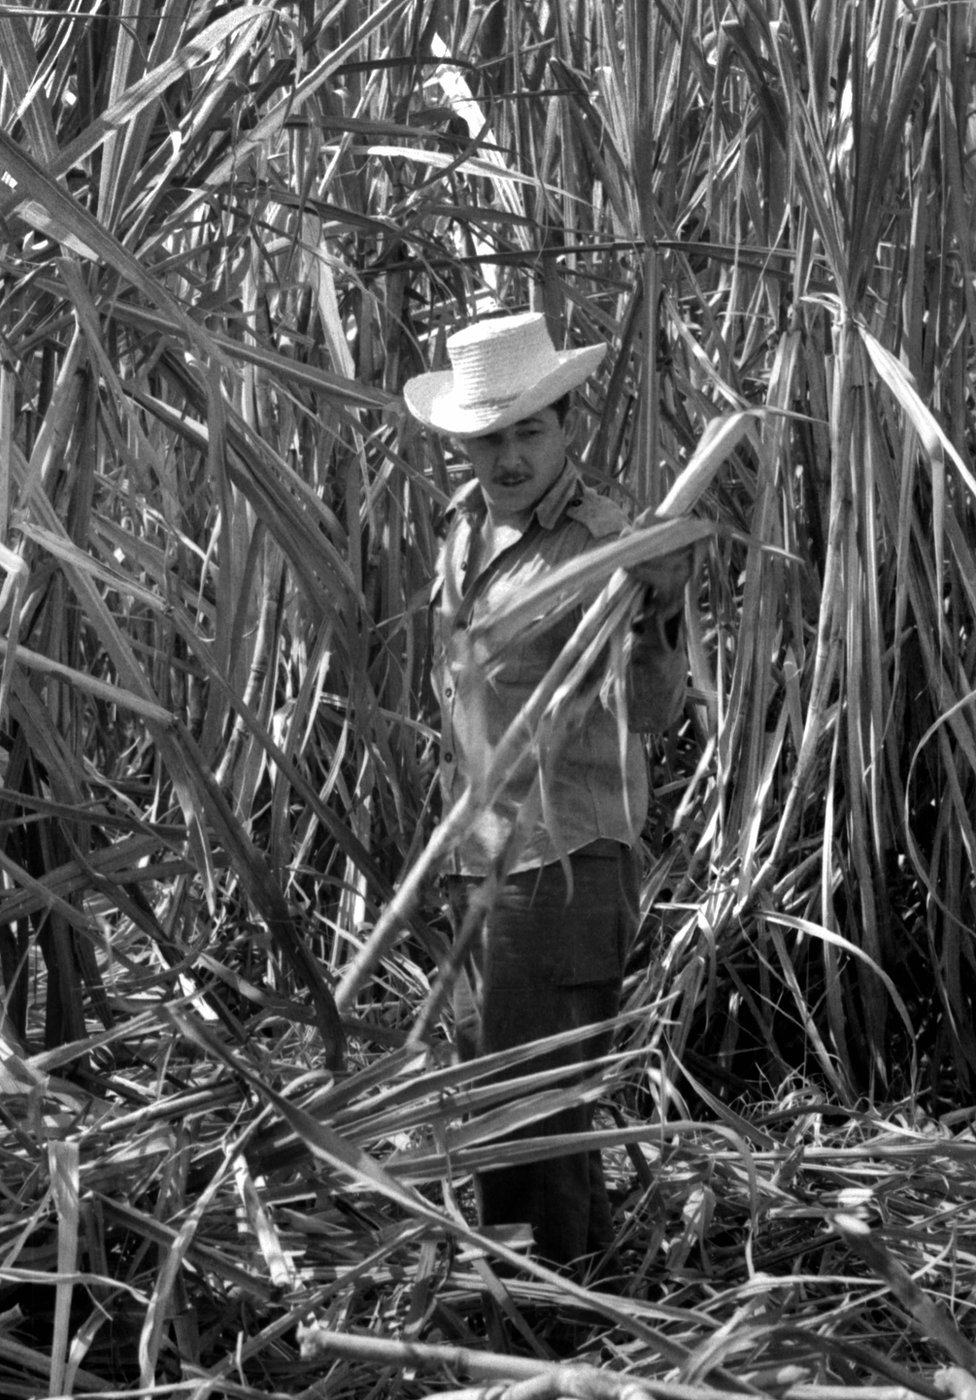 Castro cutting sugar cane. Cuba, 1970. (Photo by Gilberto Ante/Roger Viollet via Getty Images)